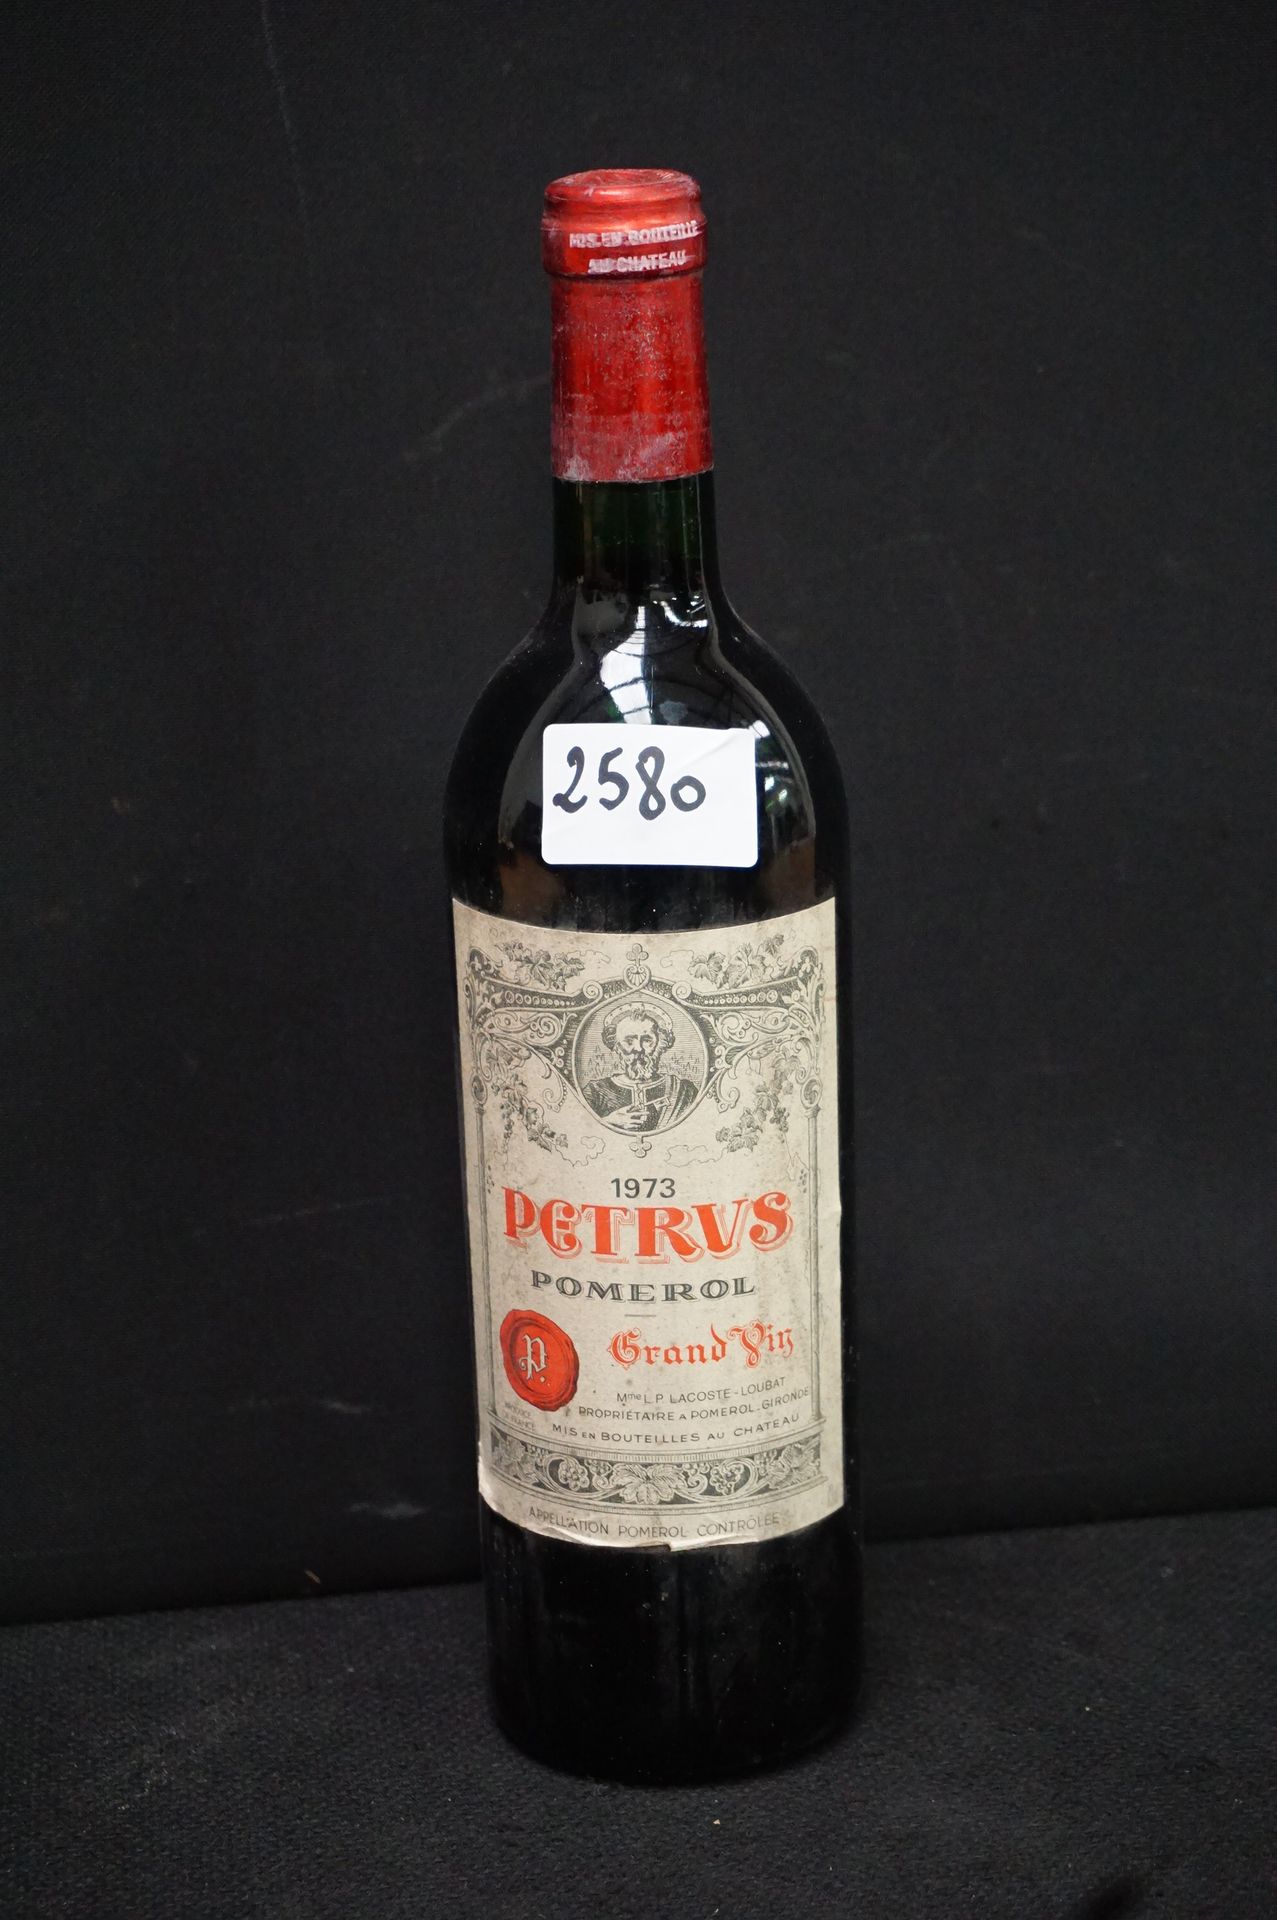 Null 1 Bottle of red wine - "PETRUS" - 1973 - POMEROL